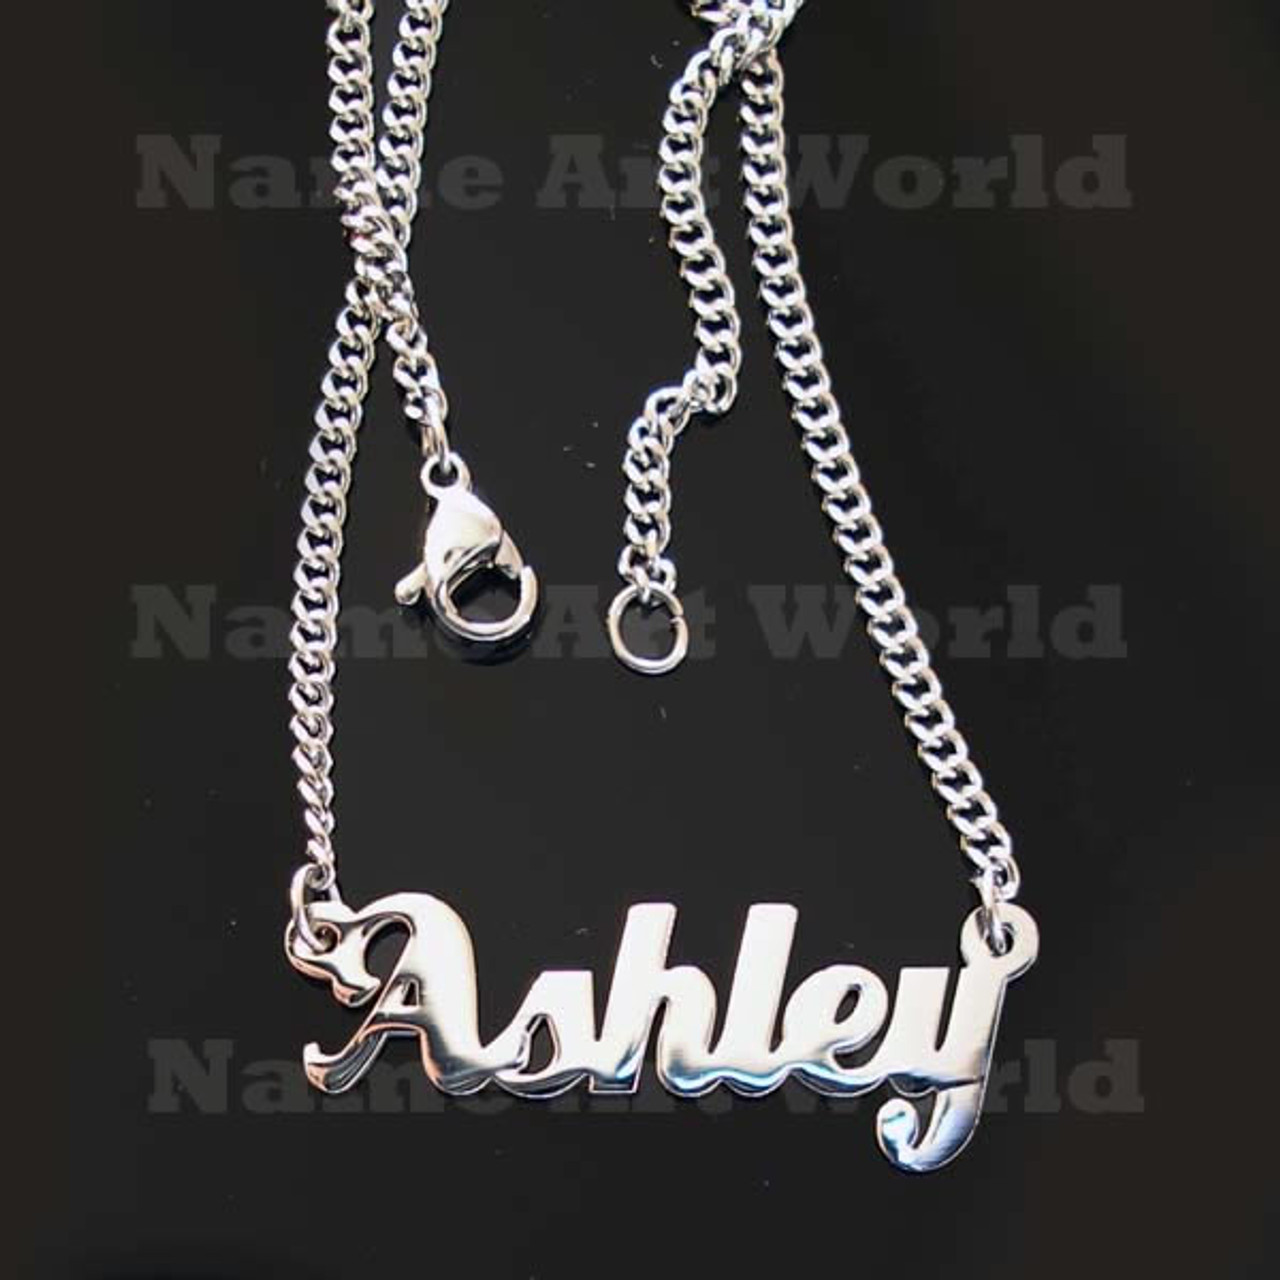 Ashley Name Necklaces. Next day ship. NeverTarnishes - Unique Art World -  Handcraft and Engraving service